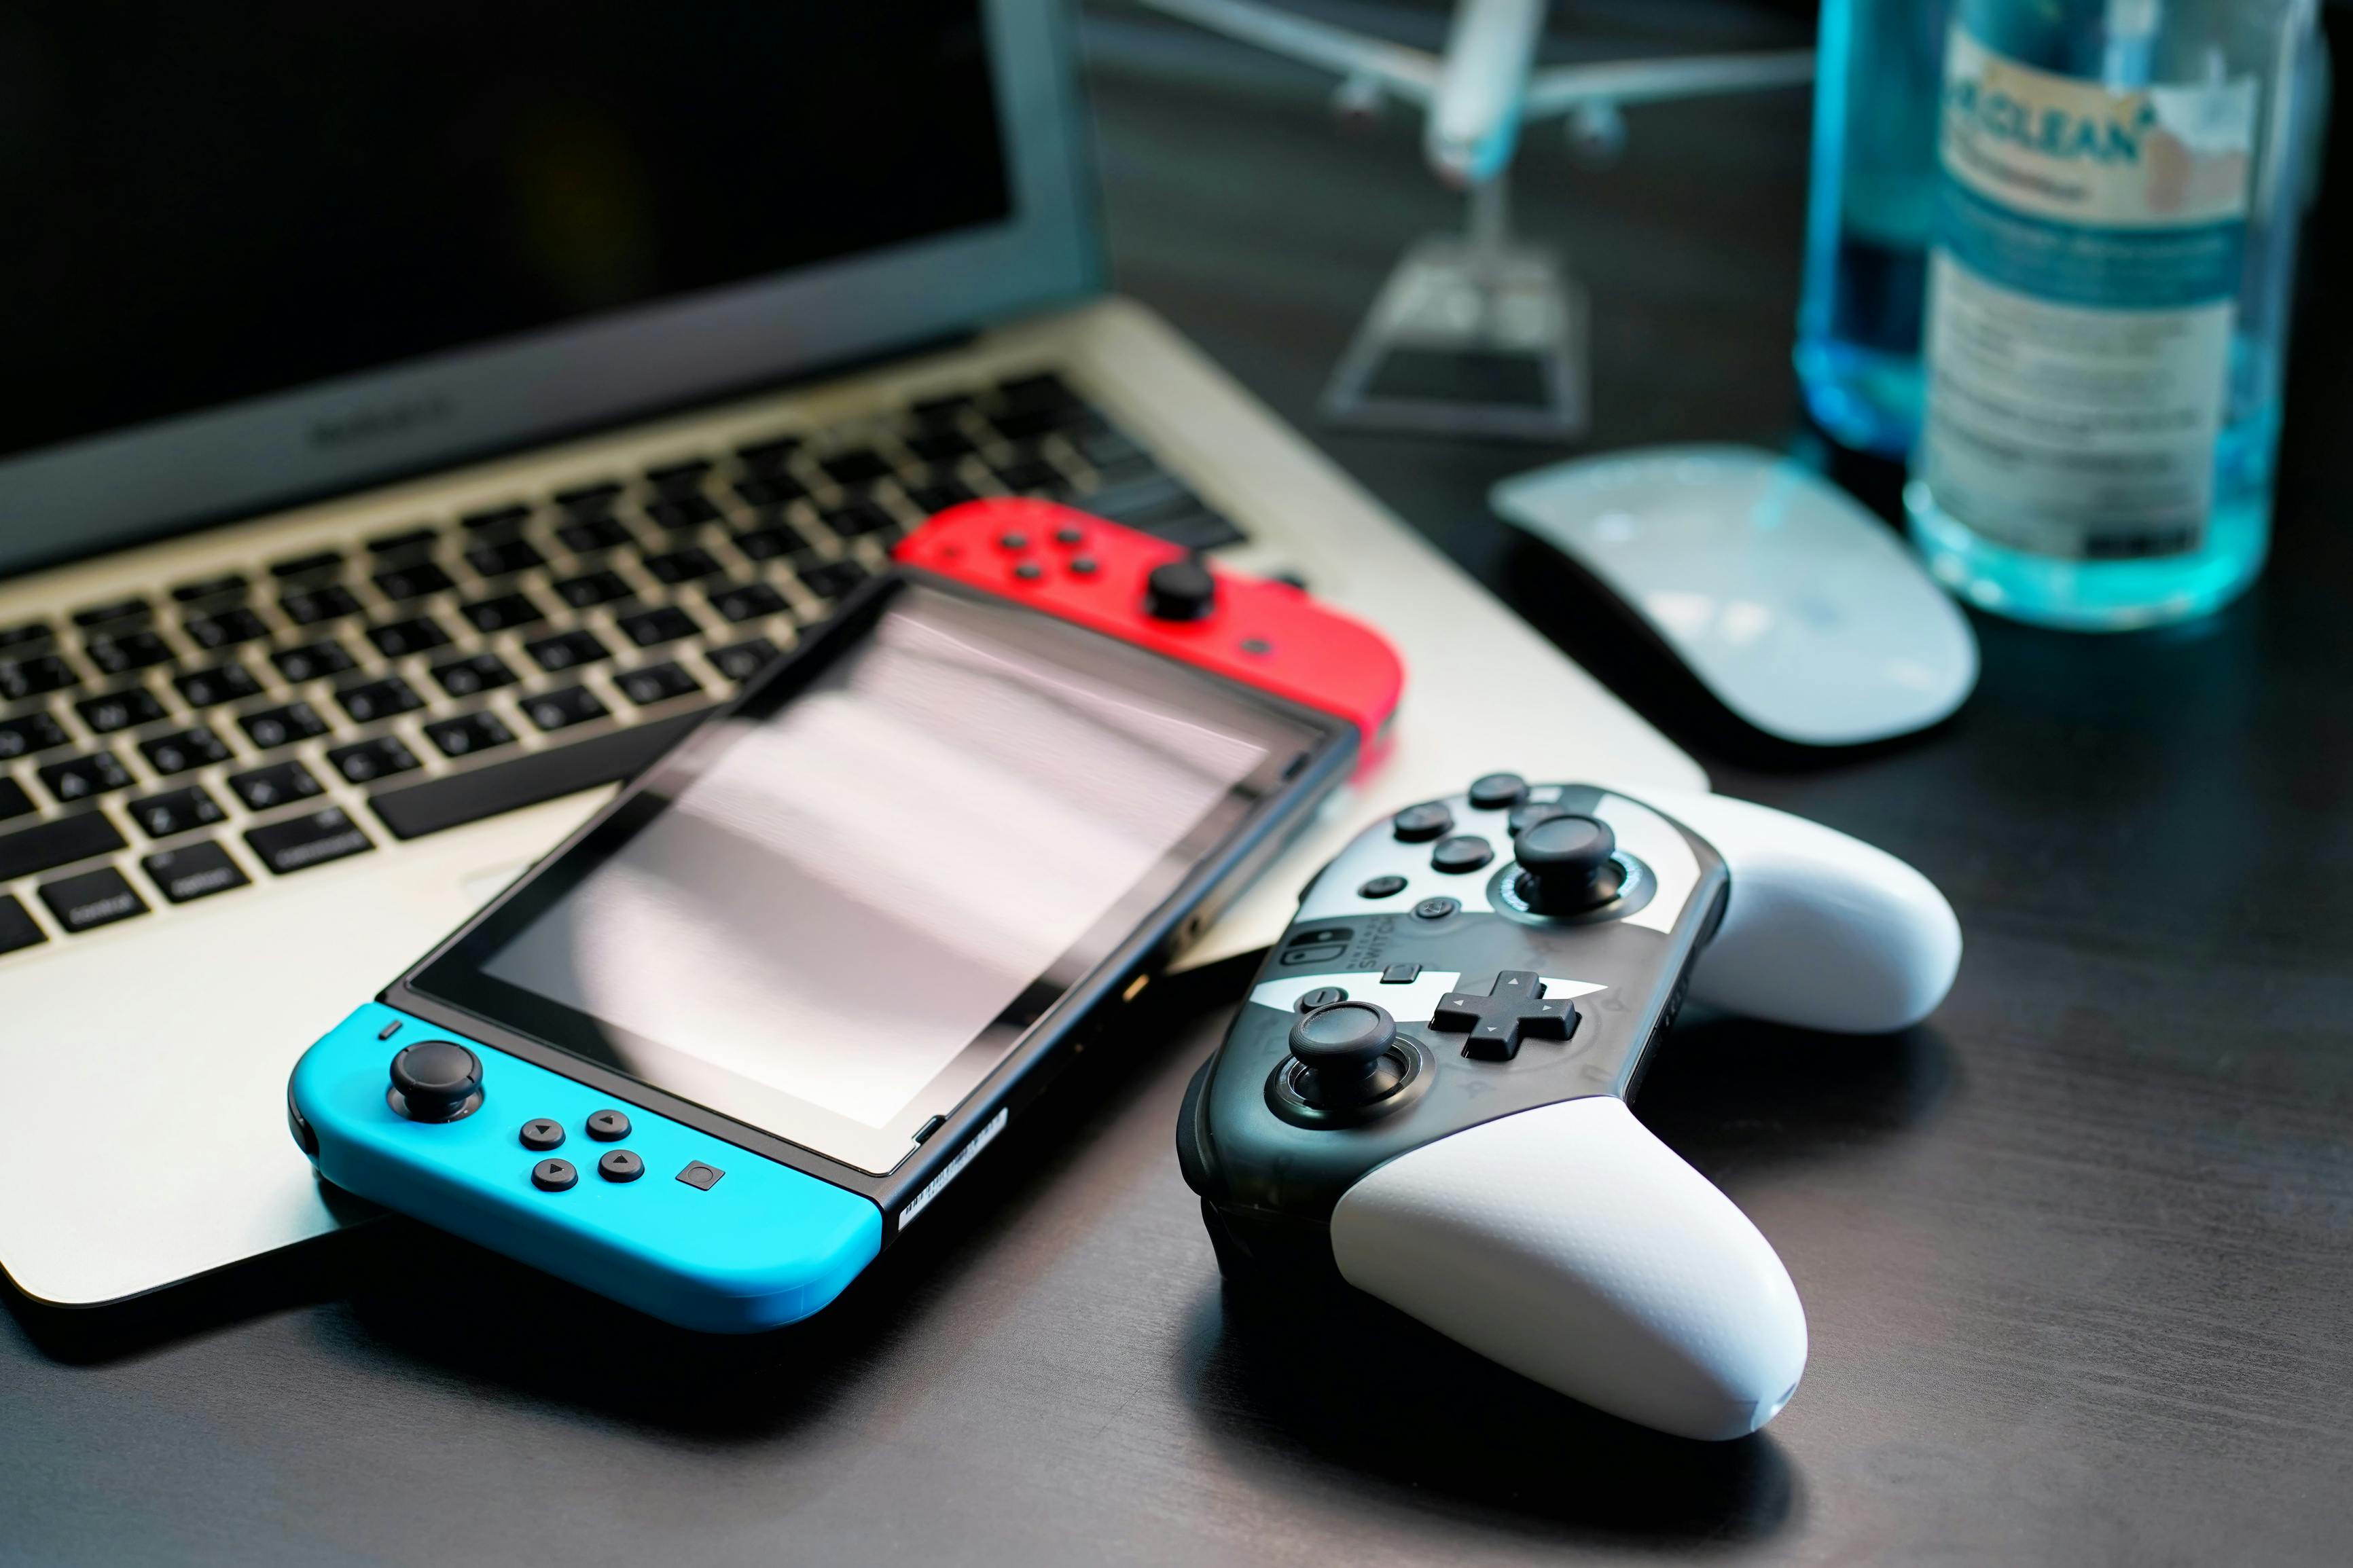 Nintendo Switch and controller on a table with laptop